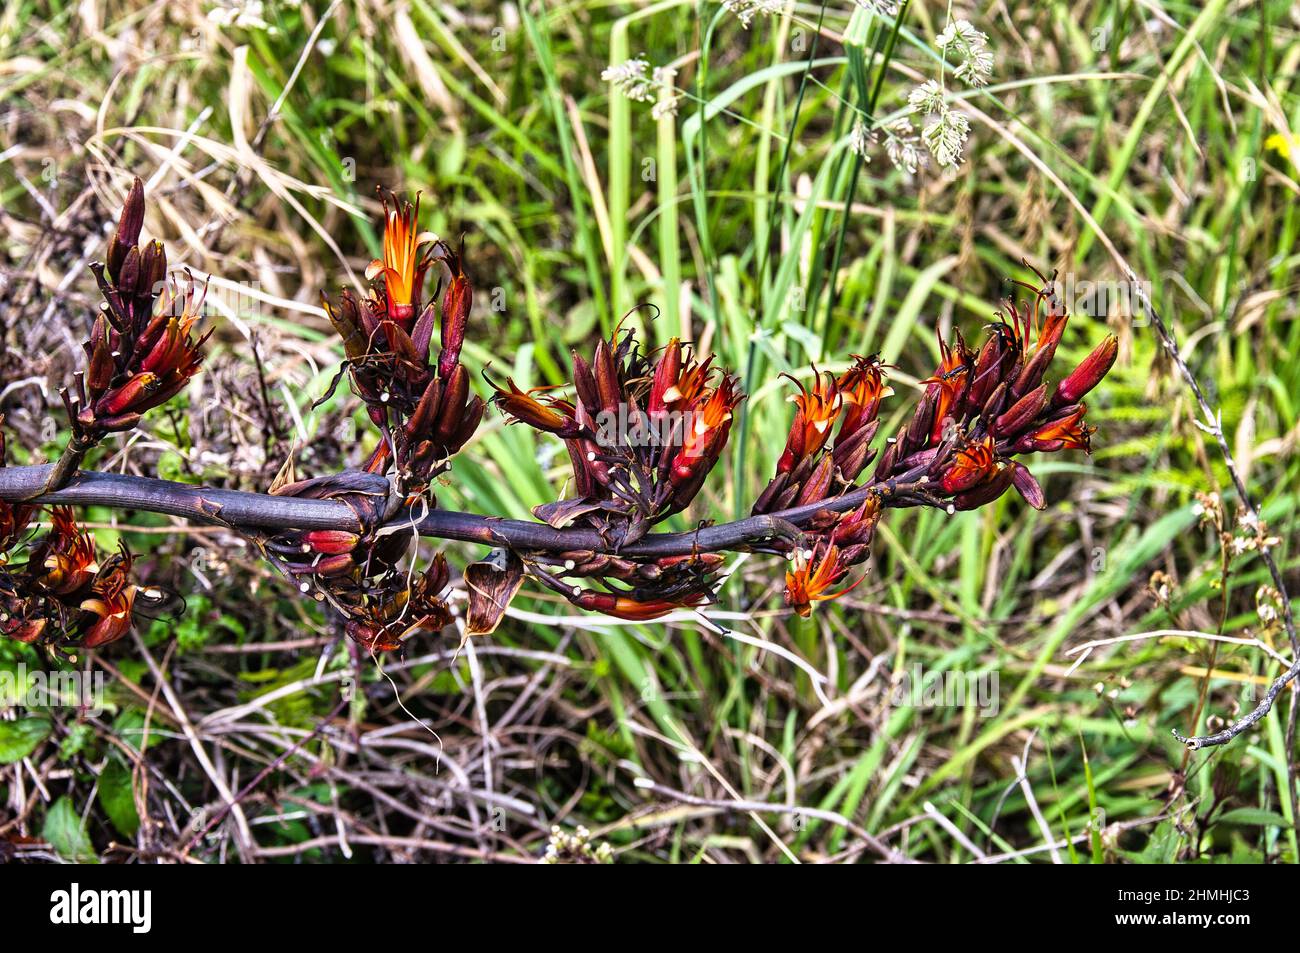 The dark red flowers of New Zealand flax (Phorium tenex) against a background of green grass Stock Photo